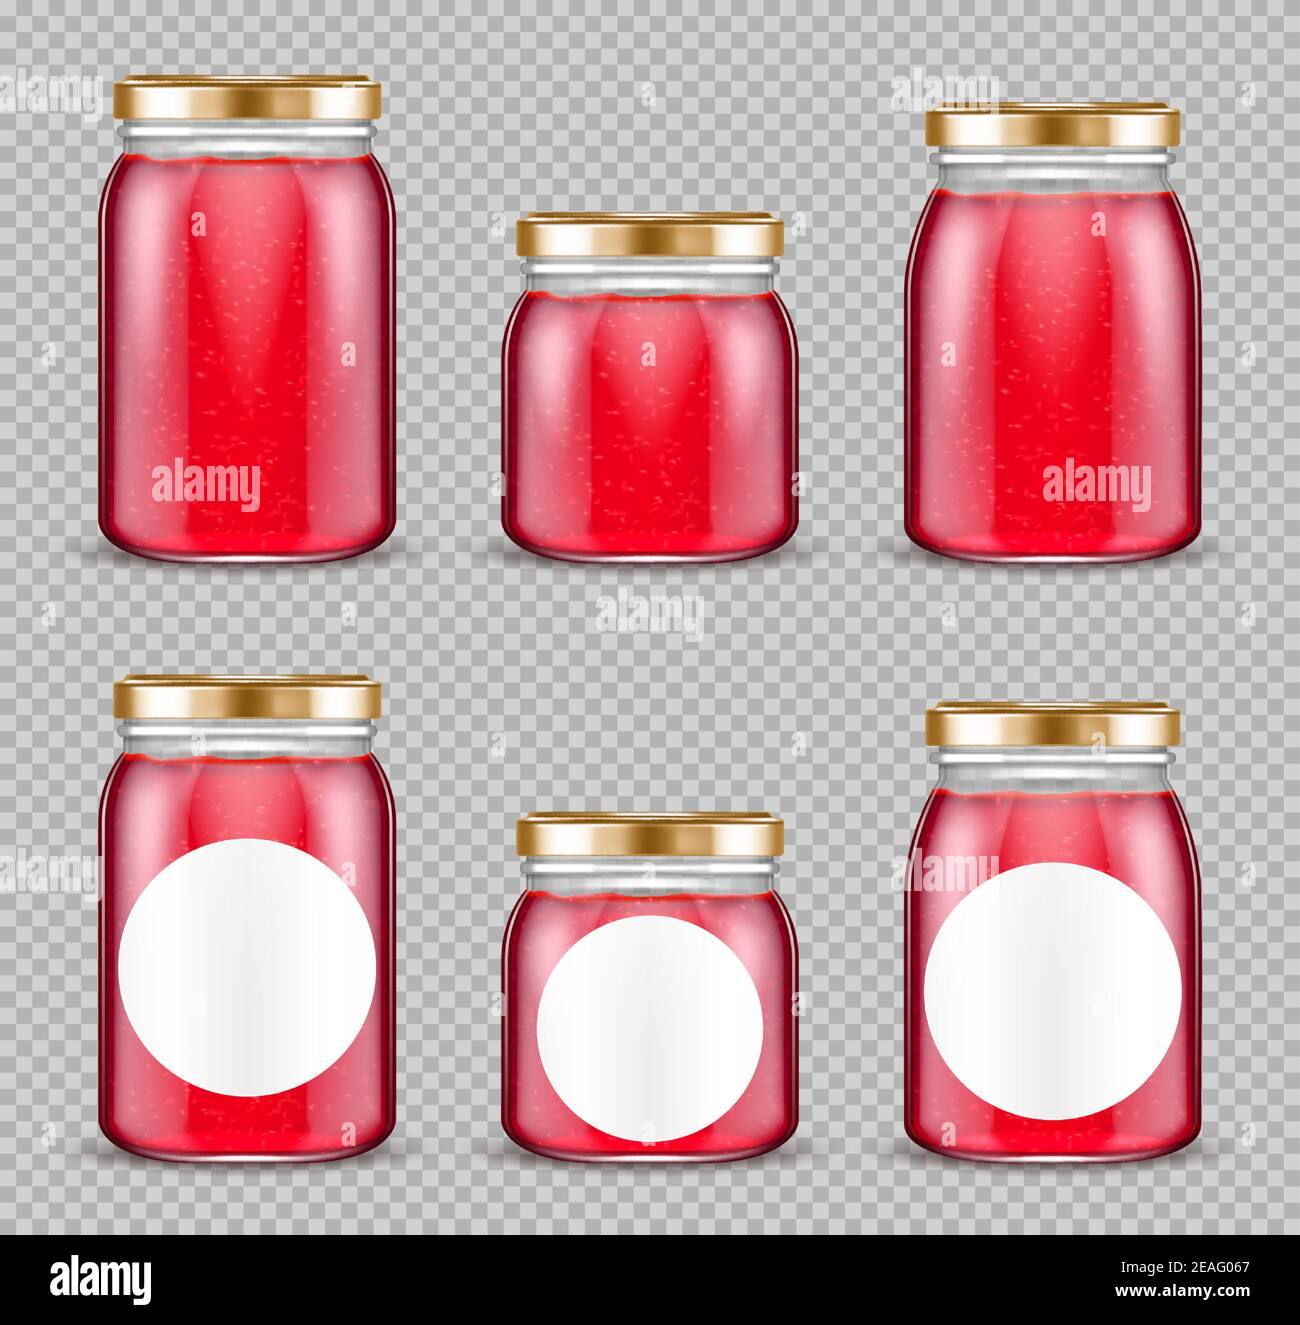 Jam jars, glass containers with pink fruit jelly, gelatin marmalade packs with cap mock up design. Blank preserve tubes of different sizes isolated on transparent background, Realistic 3d vector set Stock Vector